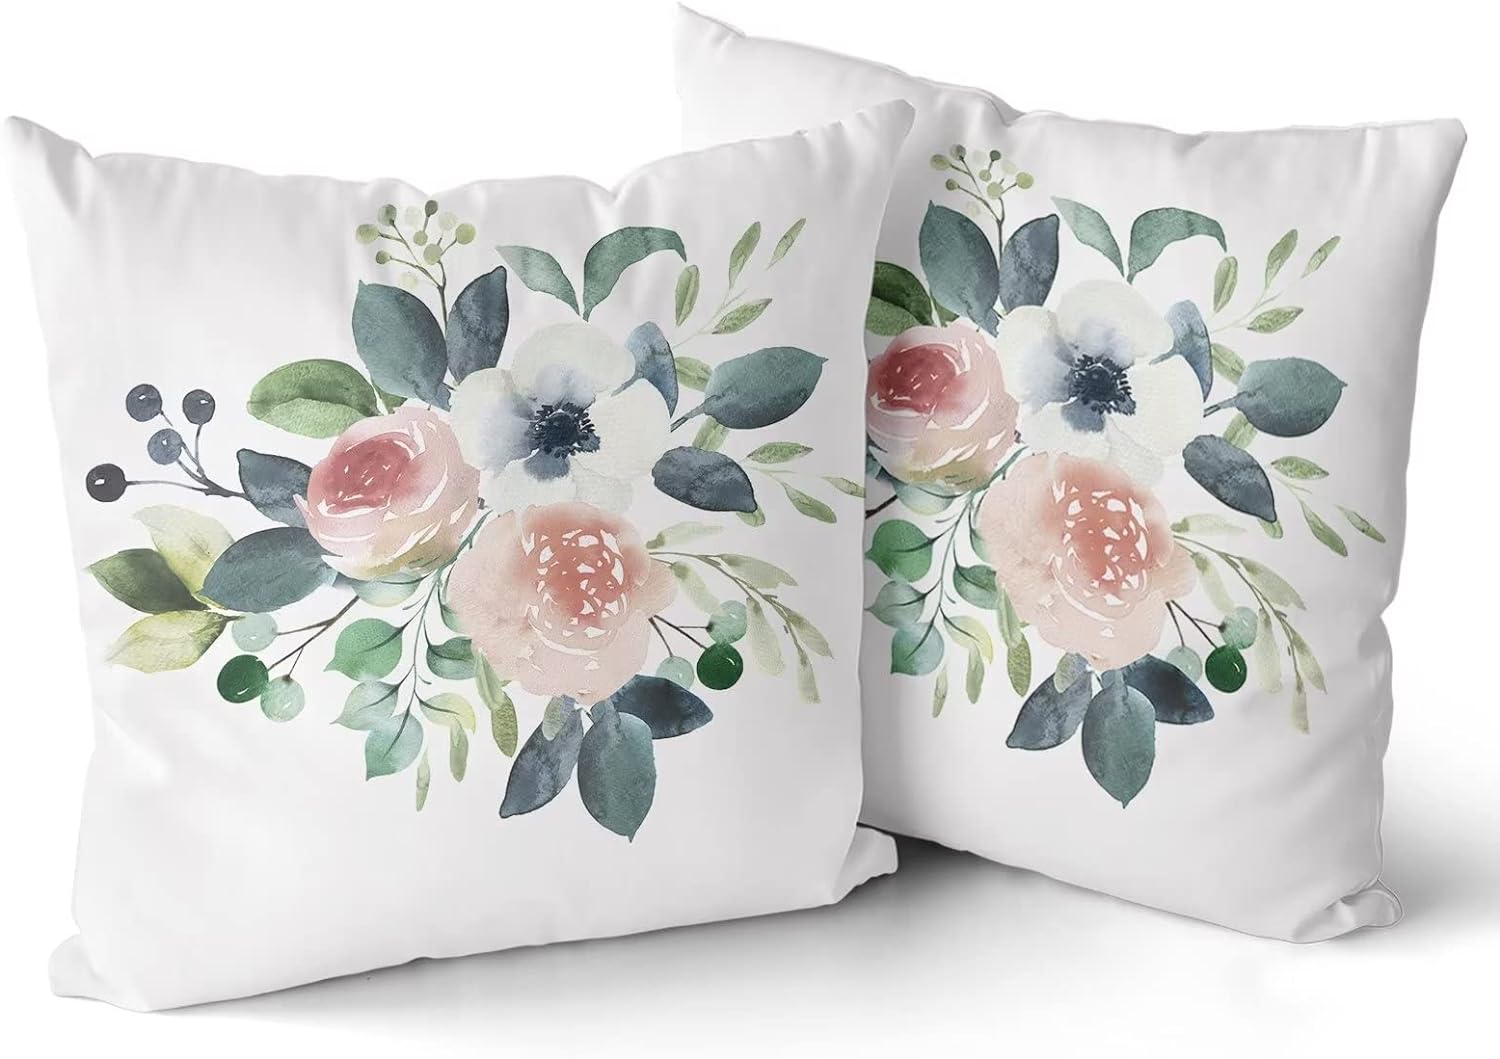 ABSOP Floral Pillow Covers 18x18 Inch Set of 2 Pink White Flower Throw Pillow Cover Spring Summer Watercolor Pillow Cover Cotton Cushion Pillow Case for Sofa Outdoor Indoor Decoration